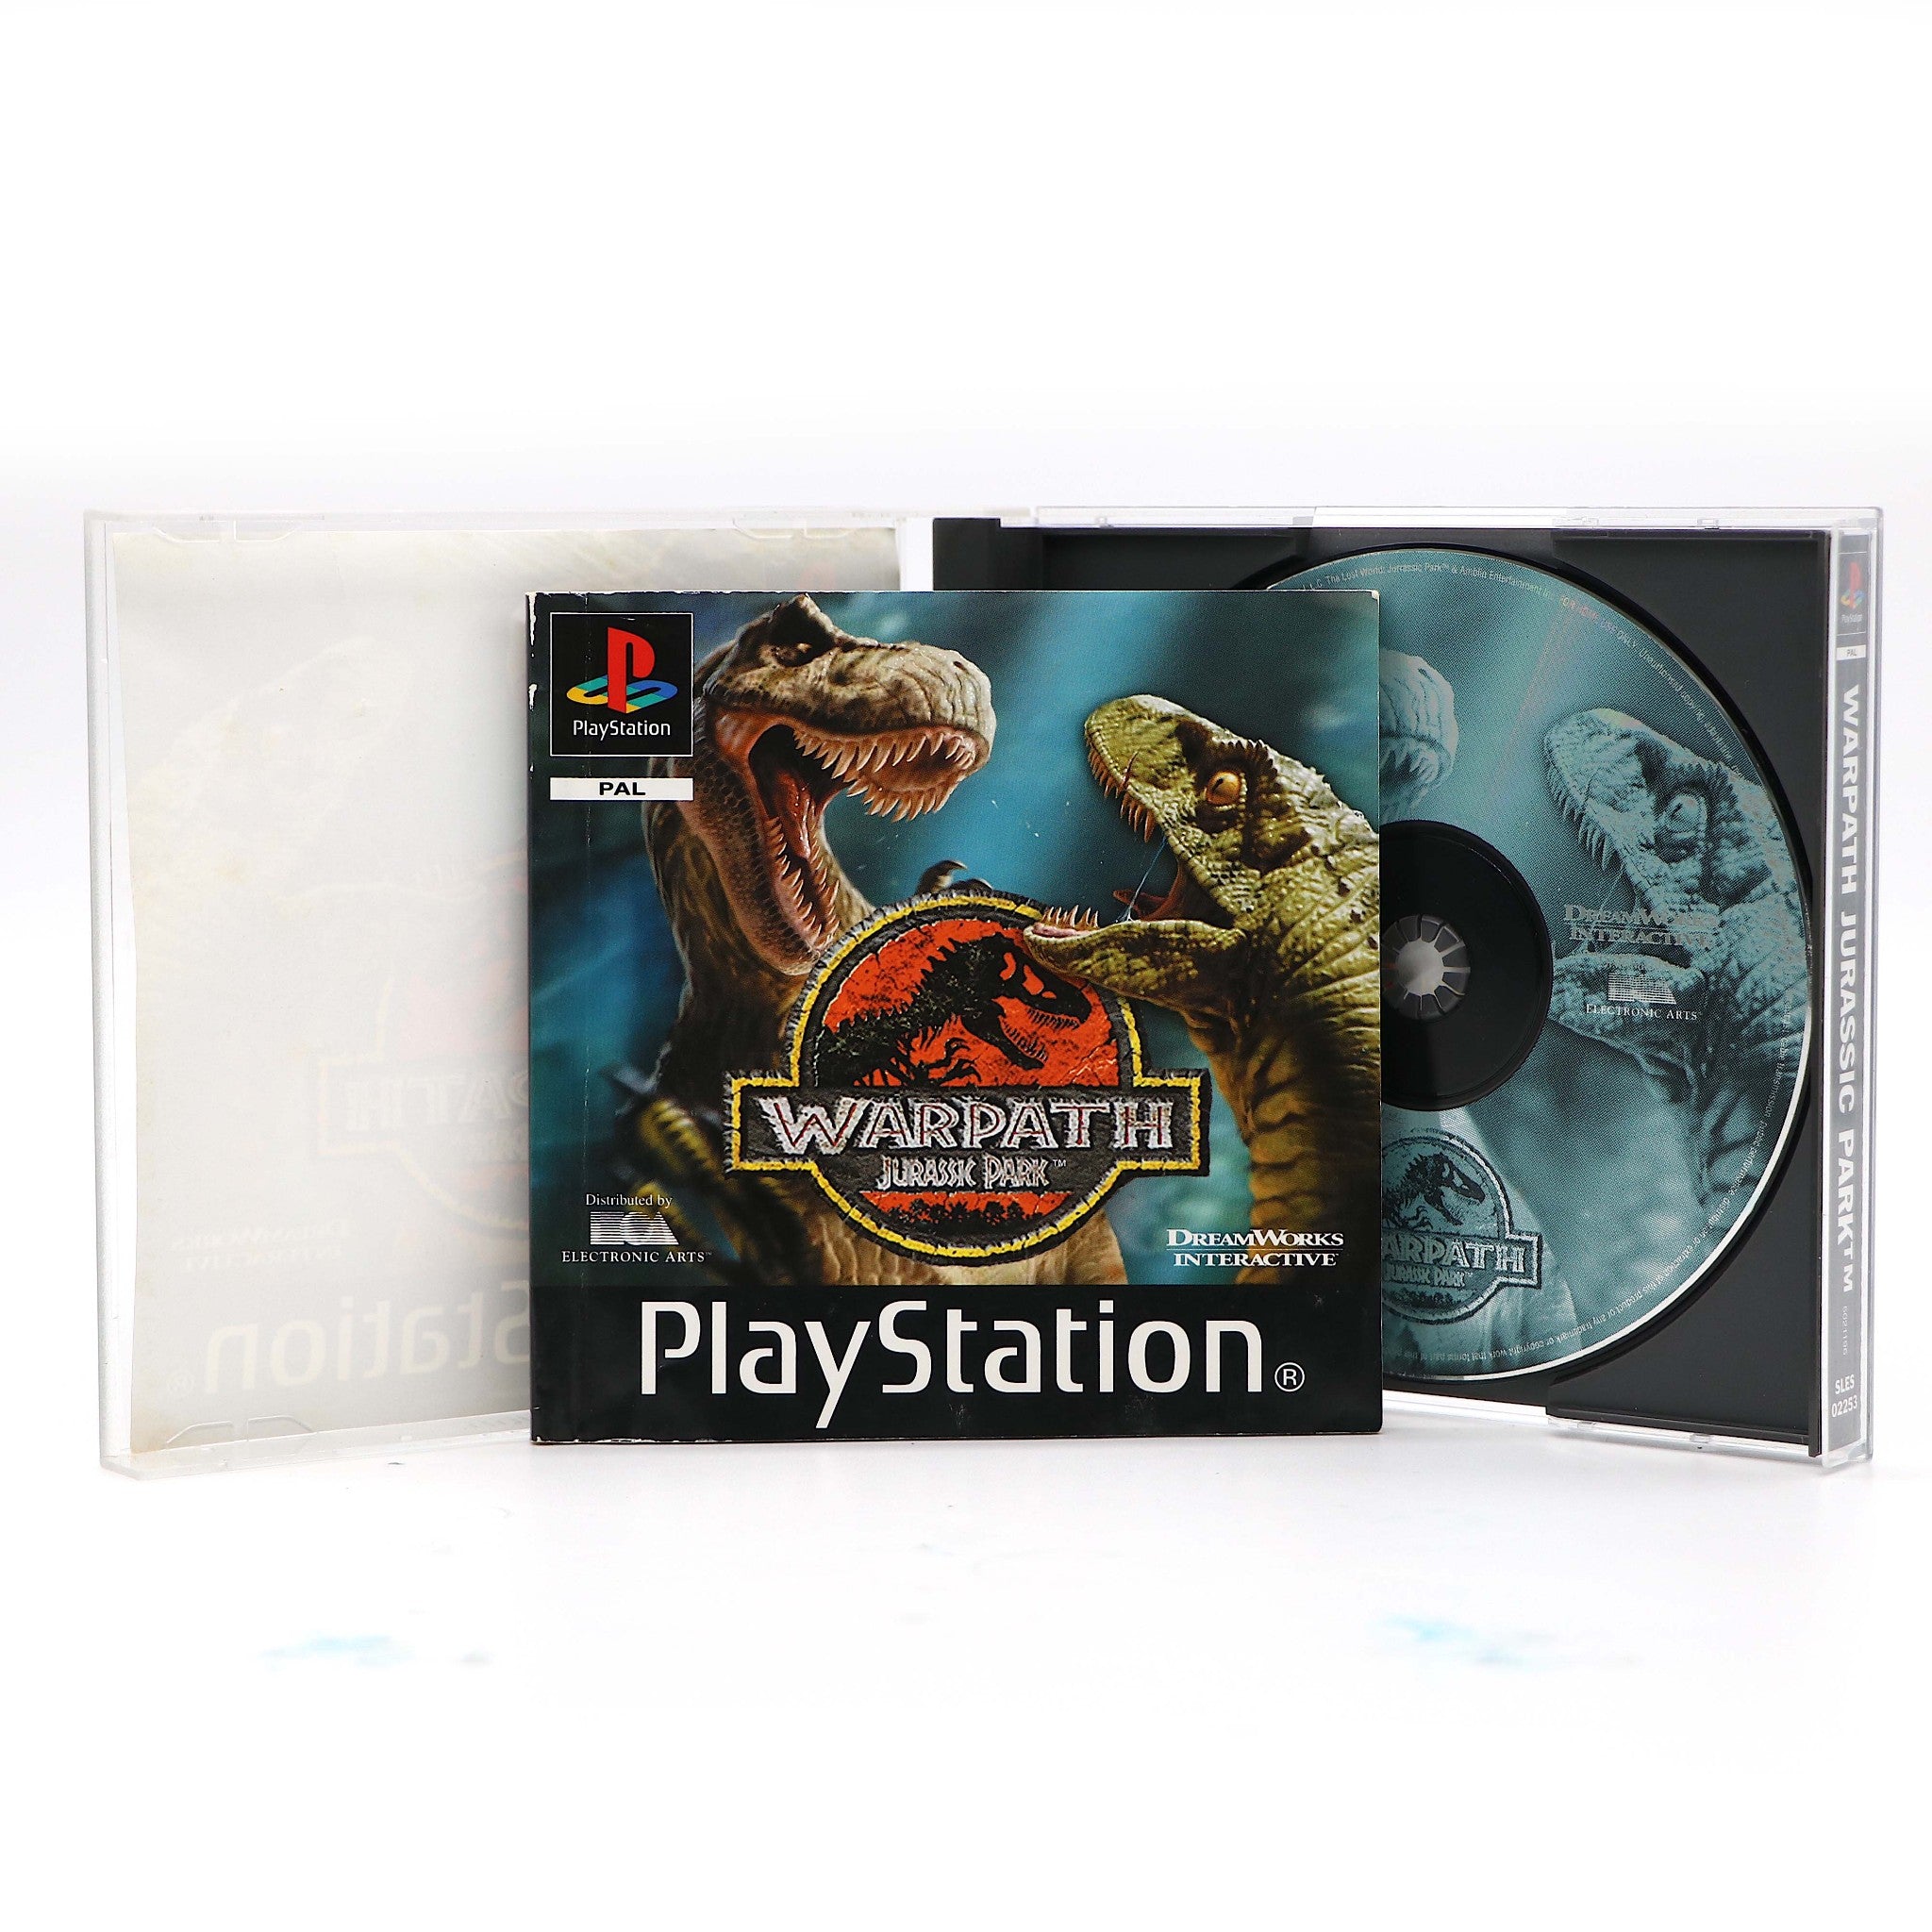 Warpath Jurassic Park | Playstation PSONE PS1 Game | Very Good Condition